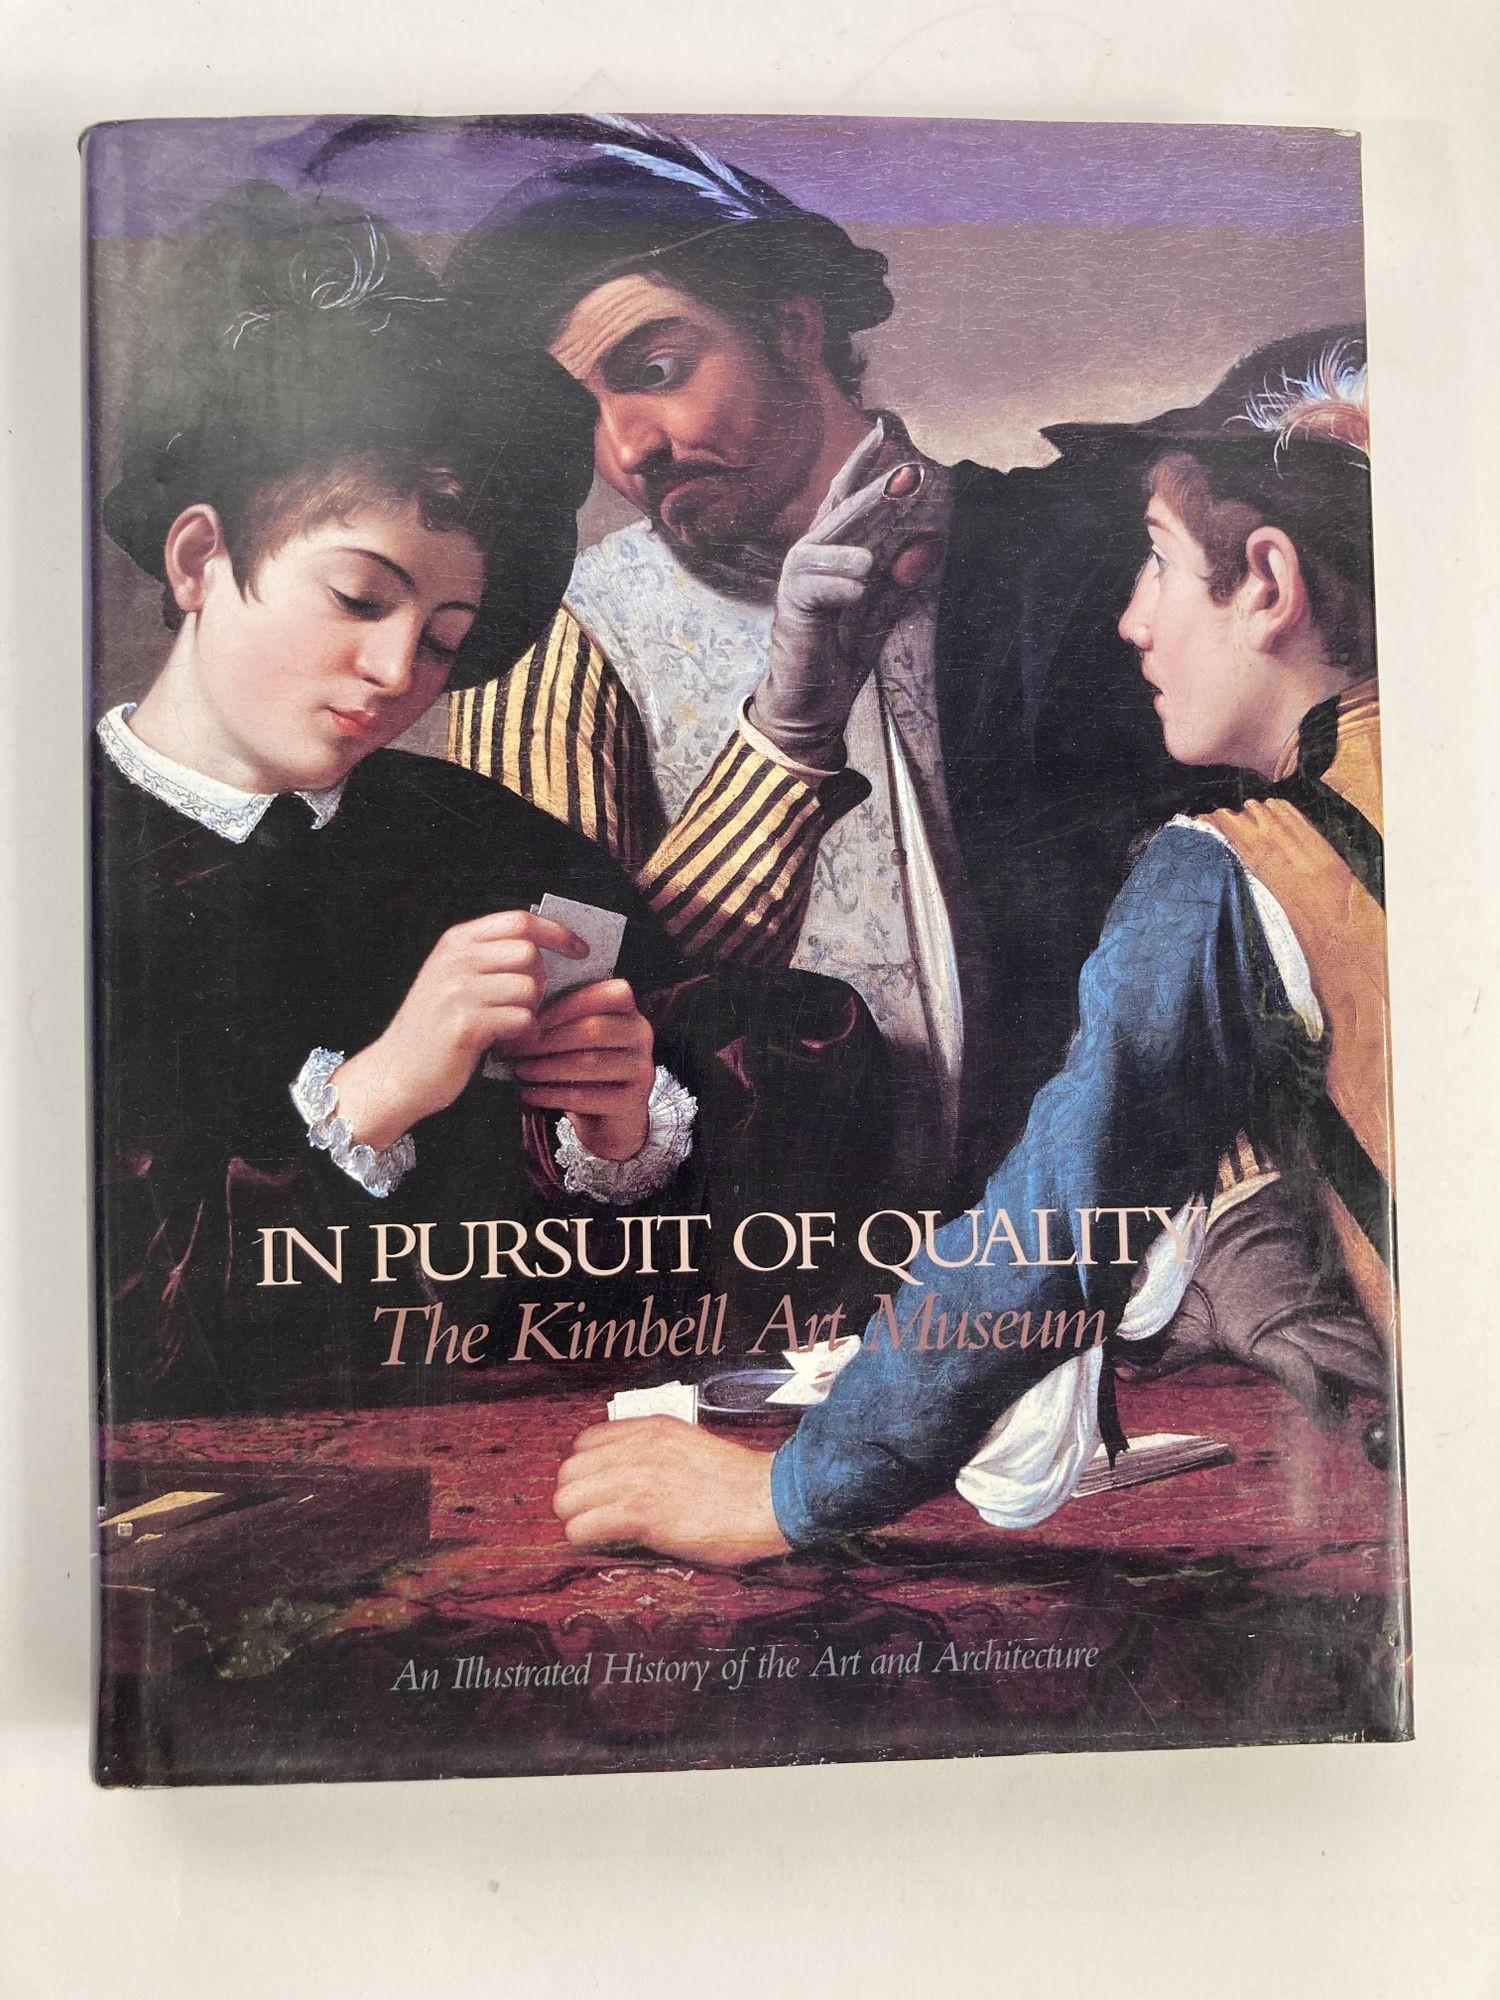 In Pursuit of Quality: The Kimbell Art Museum.
An Illustrated History of the Art and Architecture Hardcover book.
March 1, 1988 by Kimbell Art Museum.
Ft. Worth, Tx: Kimbell Art Museum, 1988.
Hardcover. VG/VG. Brown cloth.
333 pp. 80 bw and 276